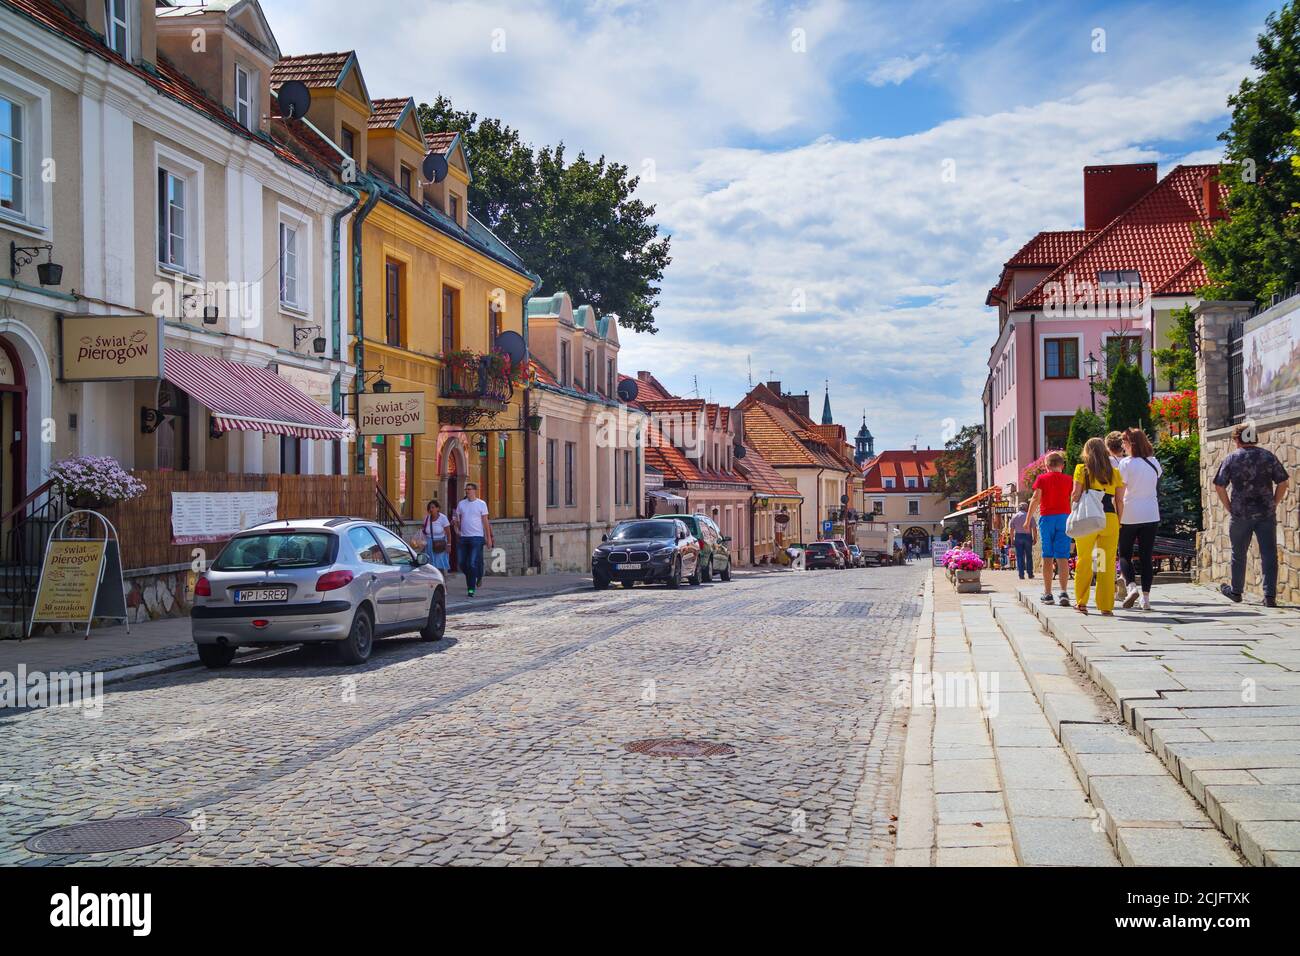 SANDOMIERZ, POLAND - August 27, 2020. View of the old, 13th century streets of Sandomierz with colorful houses Stock Photo